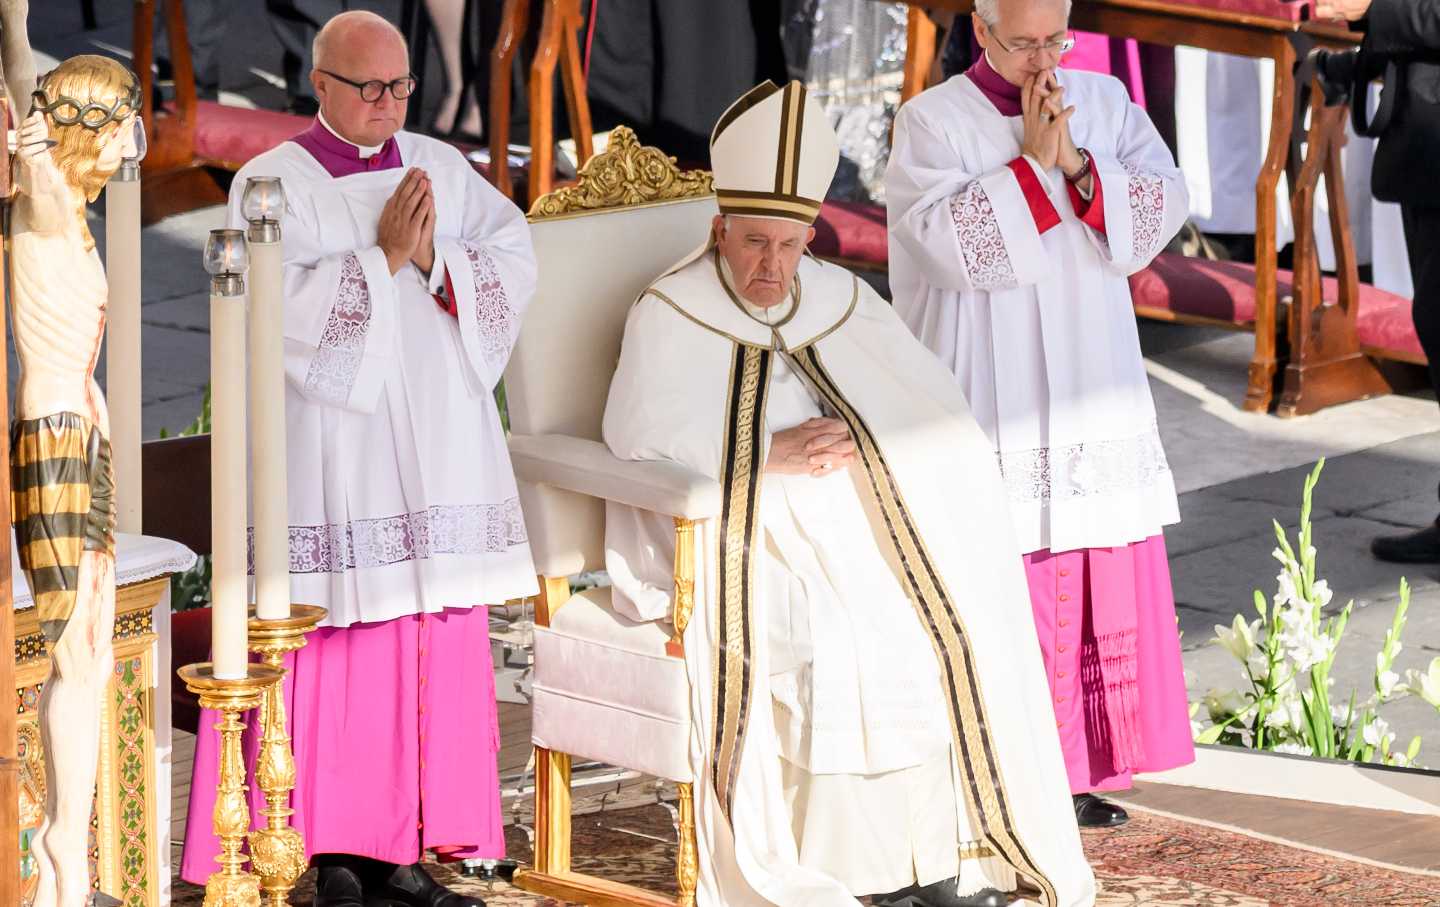 Pope Francis presides with the College of Cardinals for the opening of the General Ordinary Assembly of the Synod of Bishops on October 4, 2023, in Vatican City.